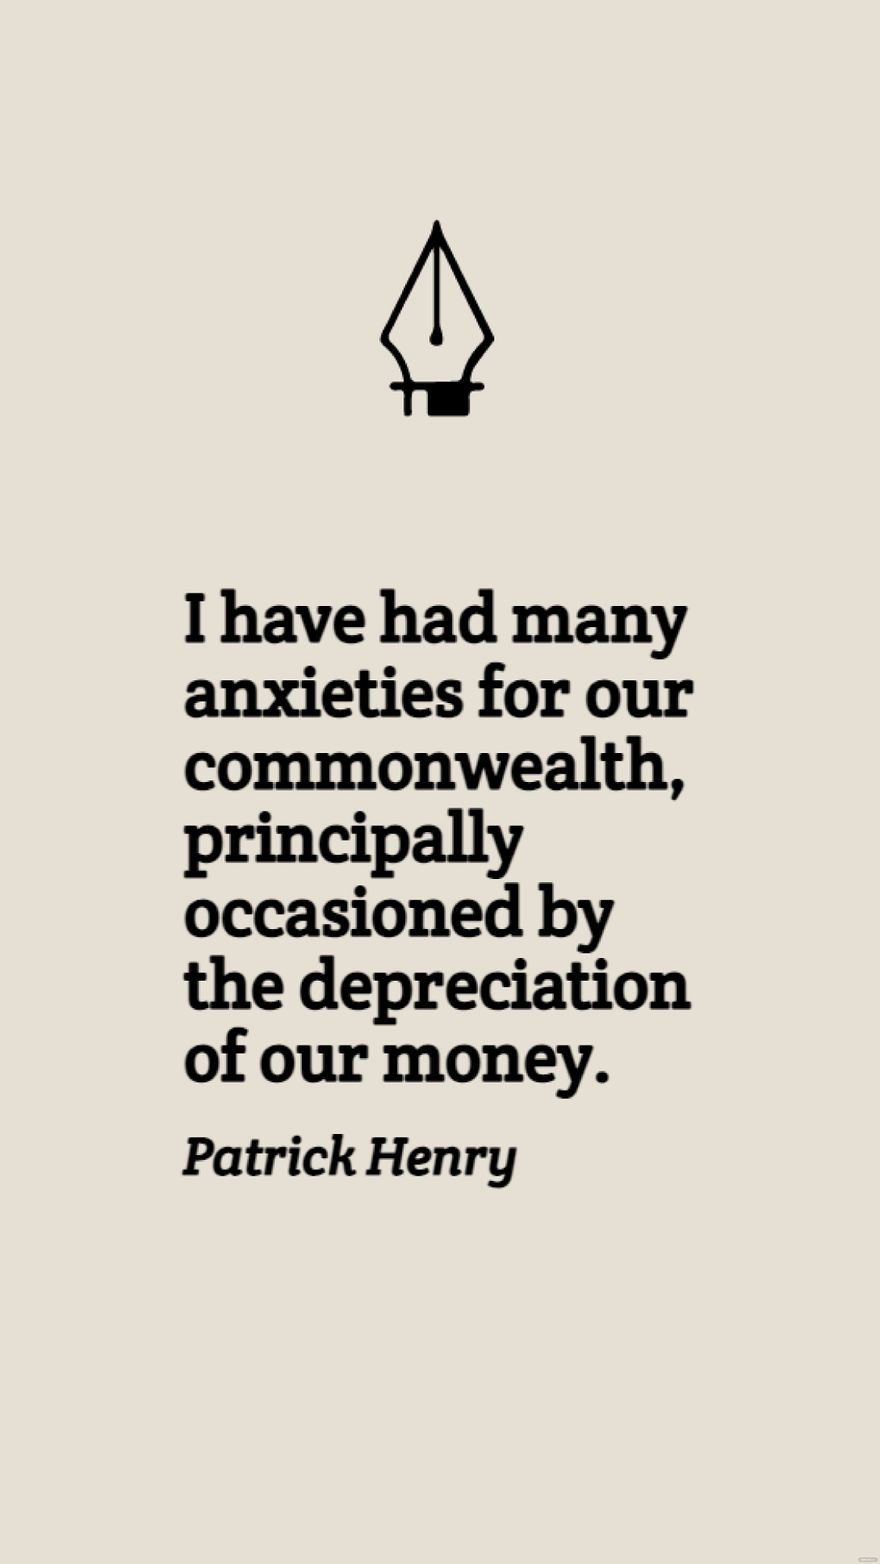 Free Patrick Henry - I have had many anxieties for our commonwealth, principally occasioned by the depreciation of our money. in JPG